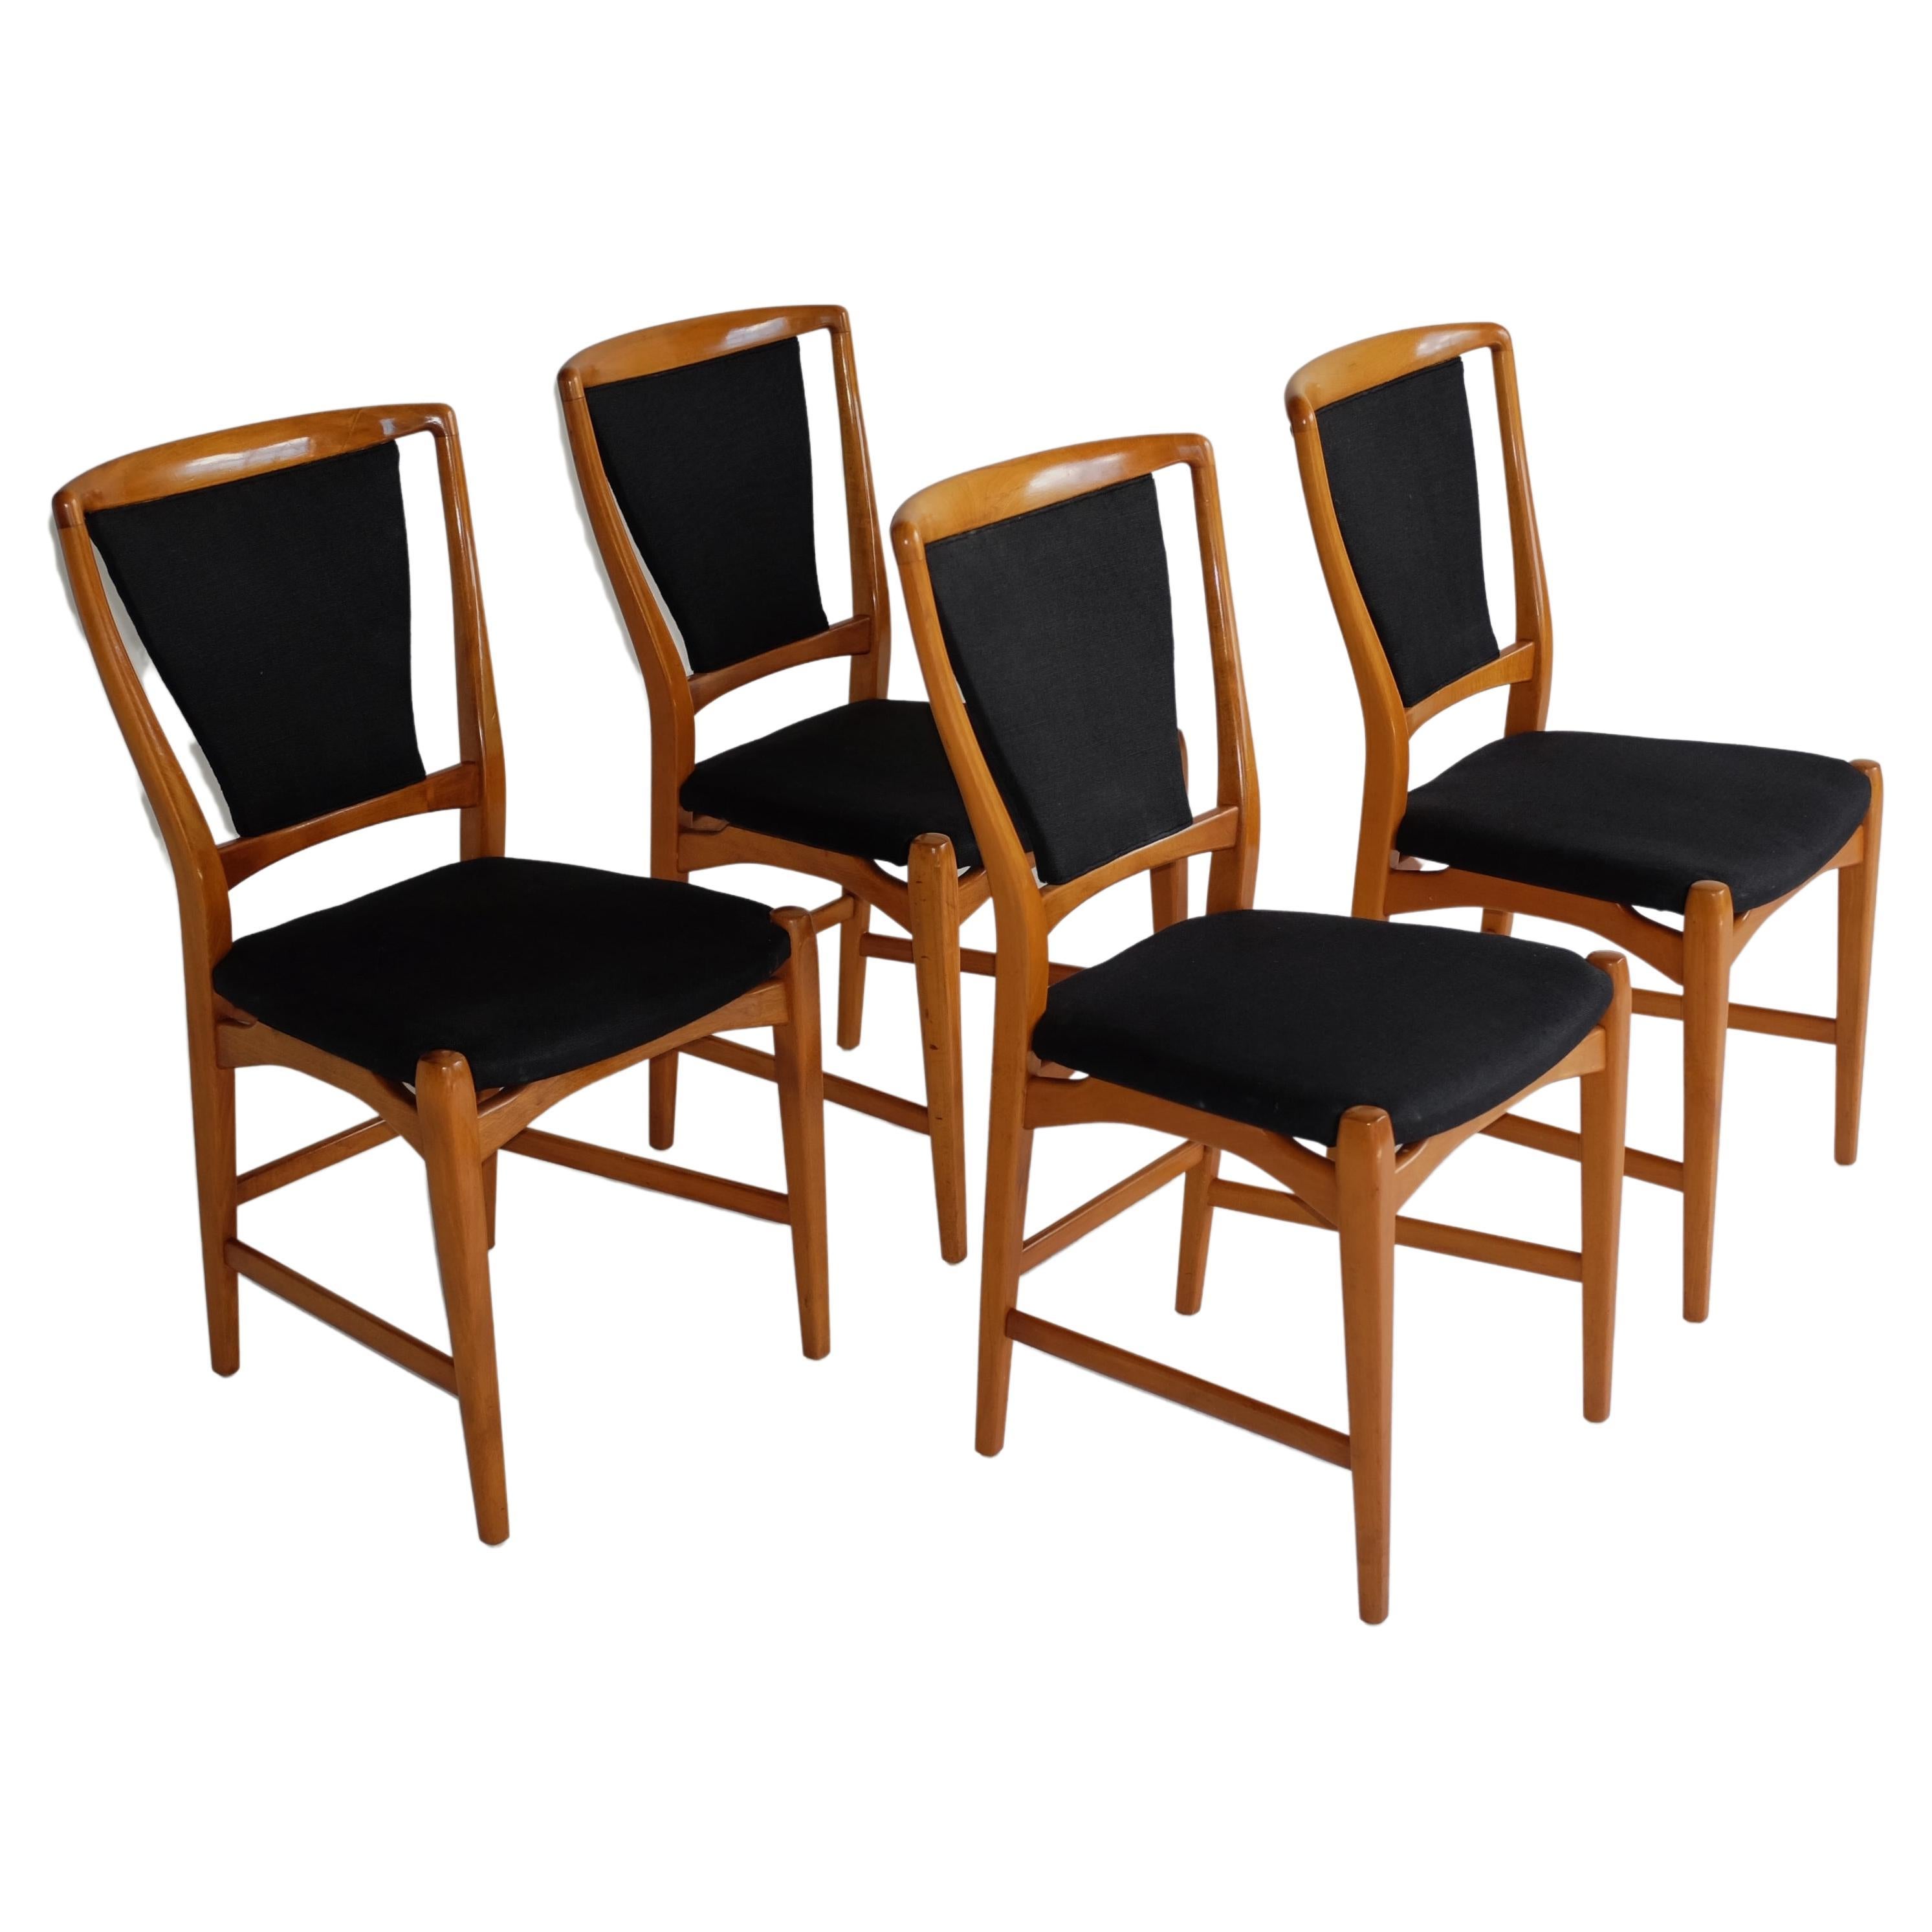 1950s Set of 4 Dining Chairs by Westbergs Möbler For Sale